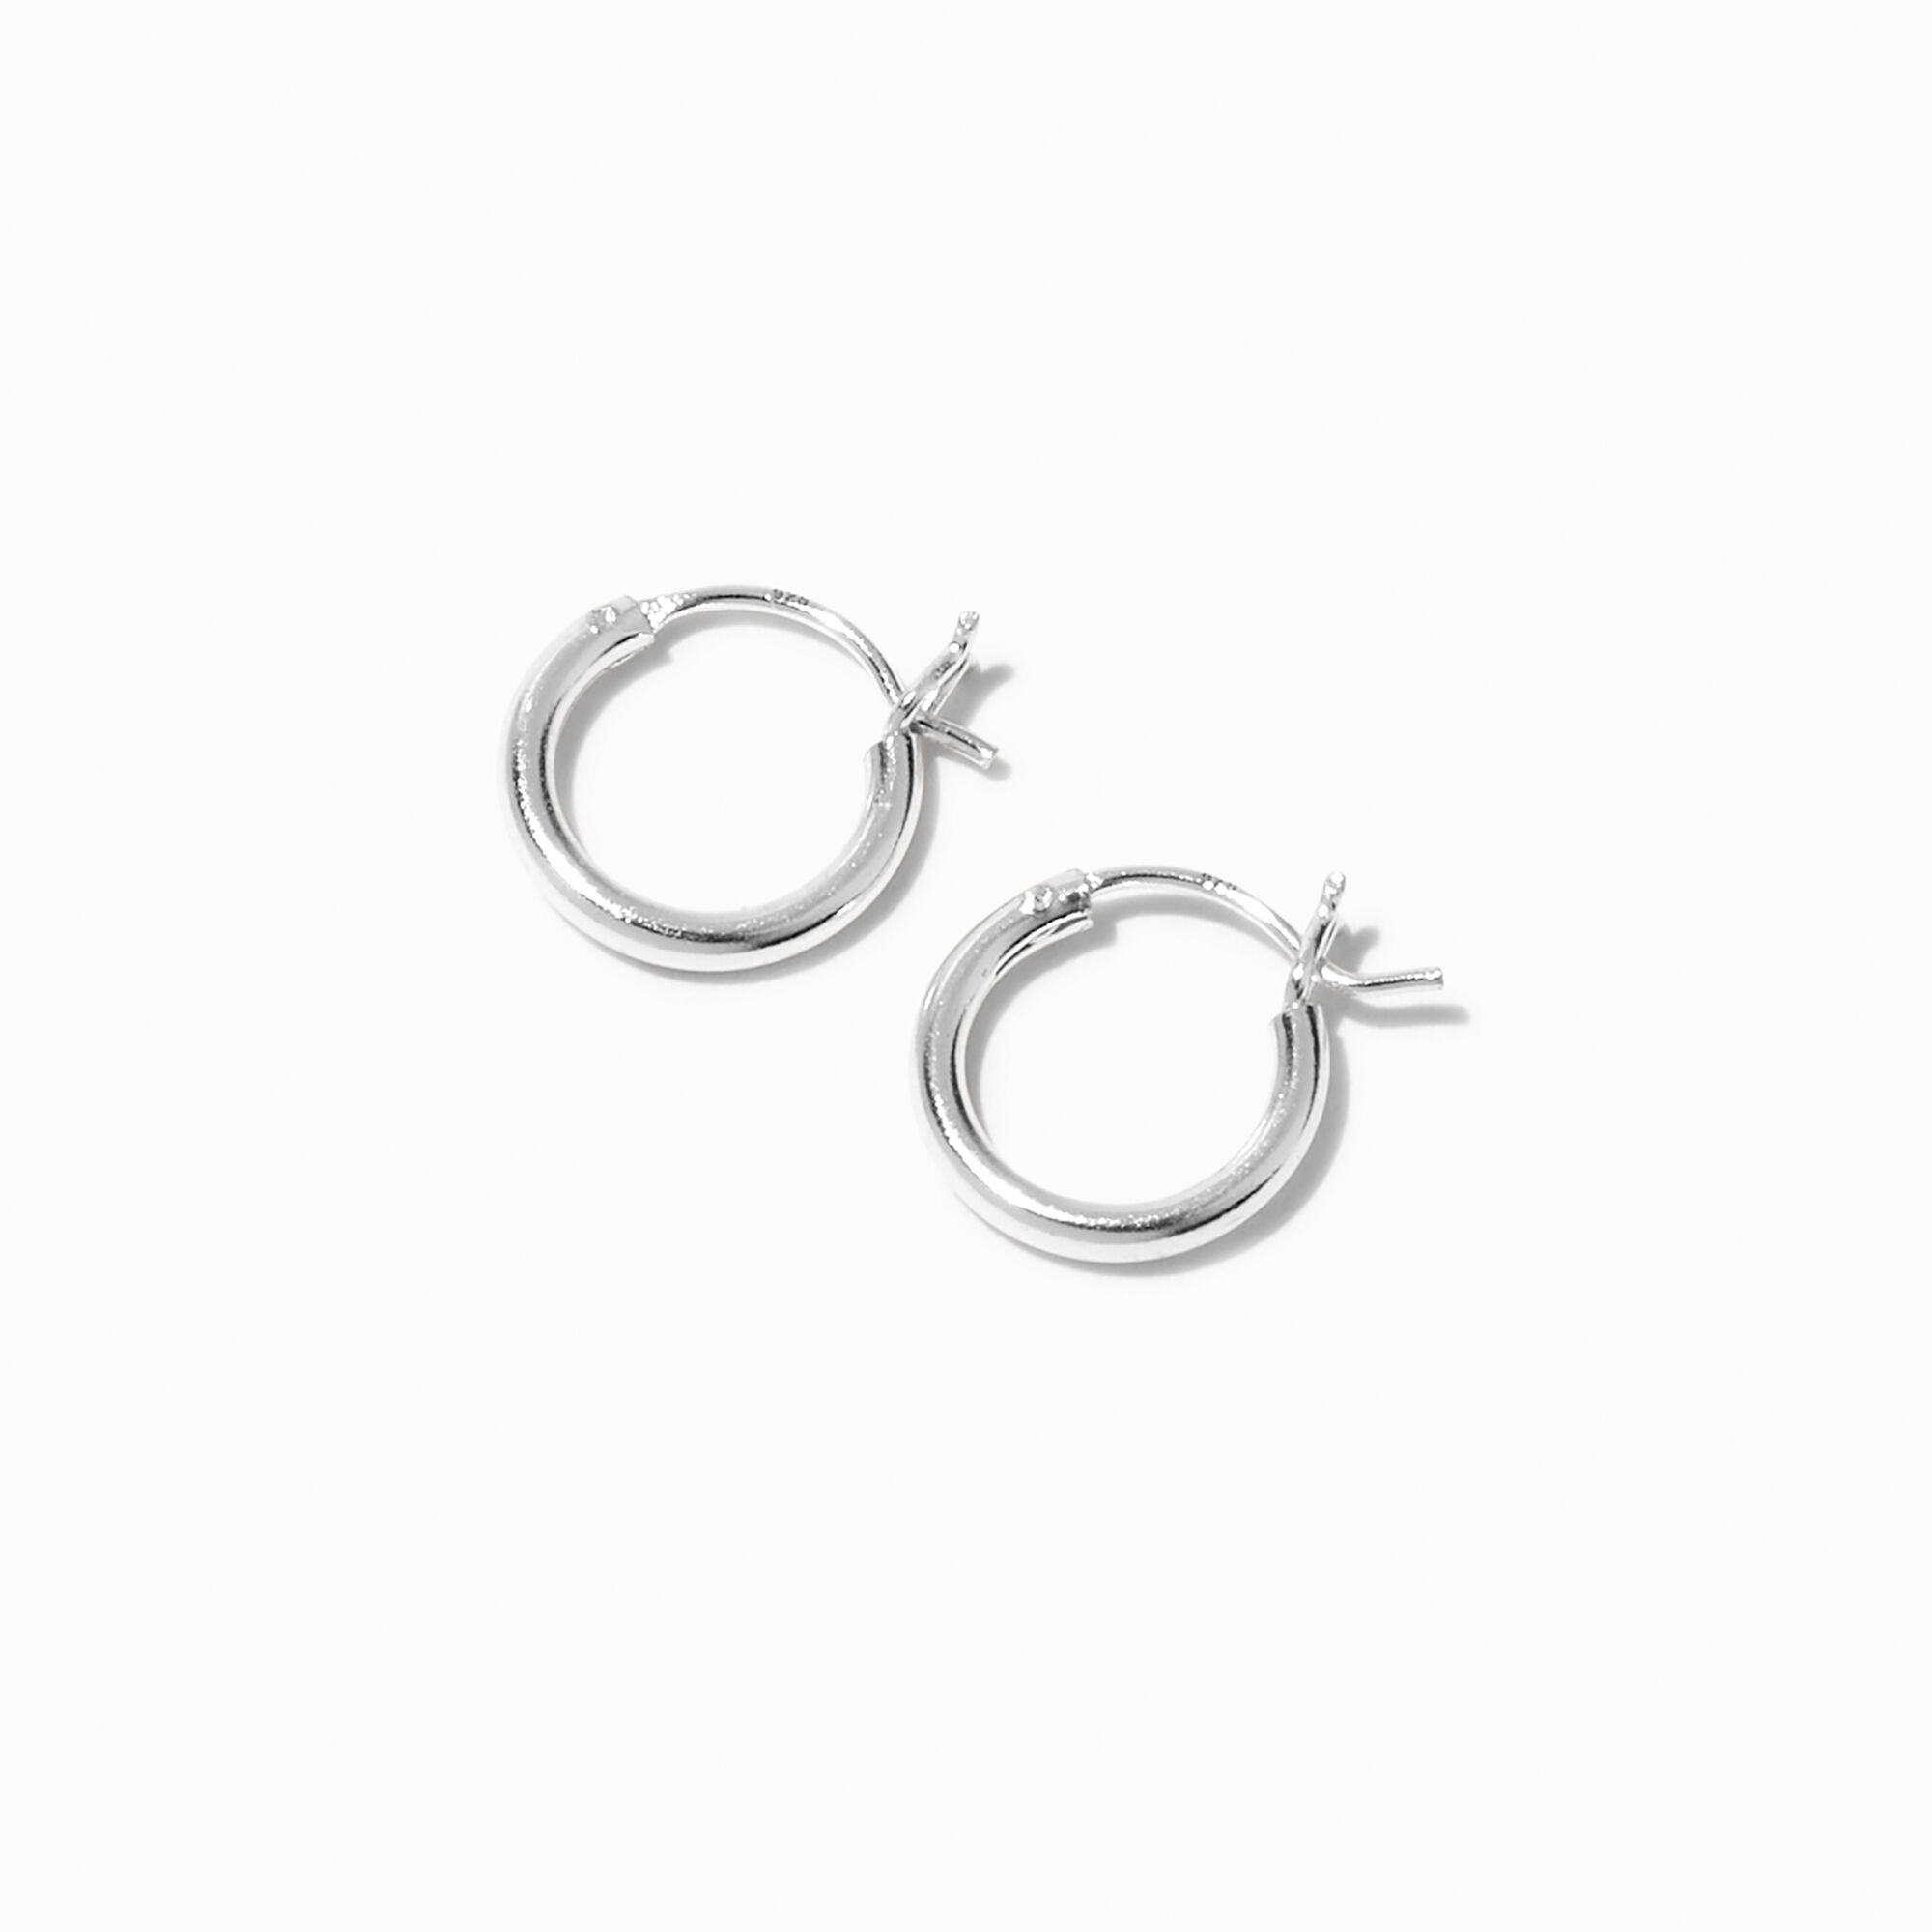 View C Luxe By Claires 8MM Hinge Hoop Earrings Silver information